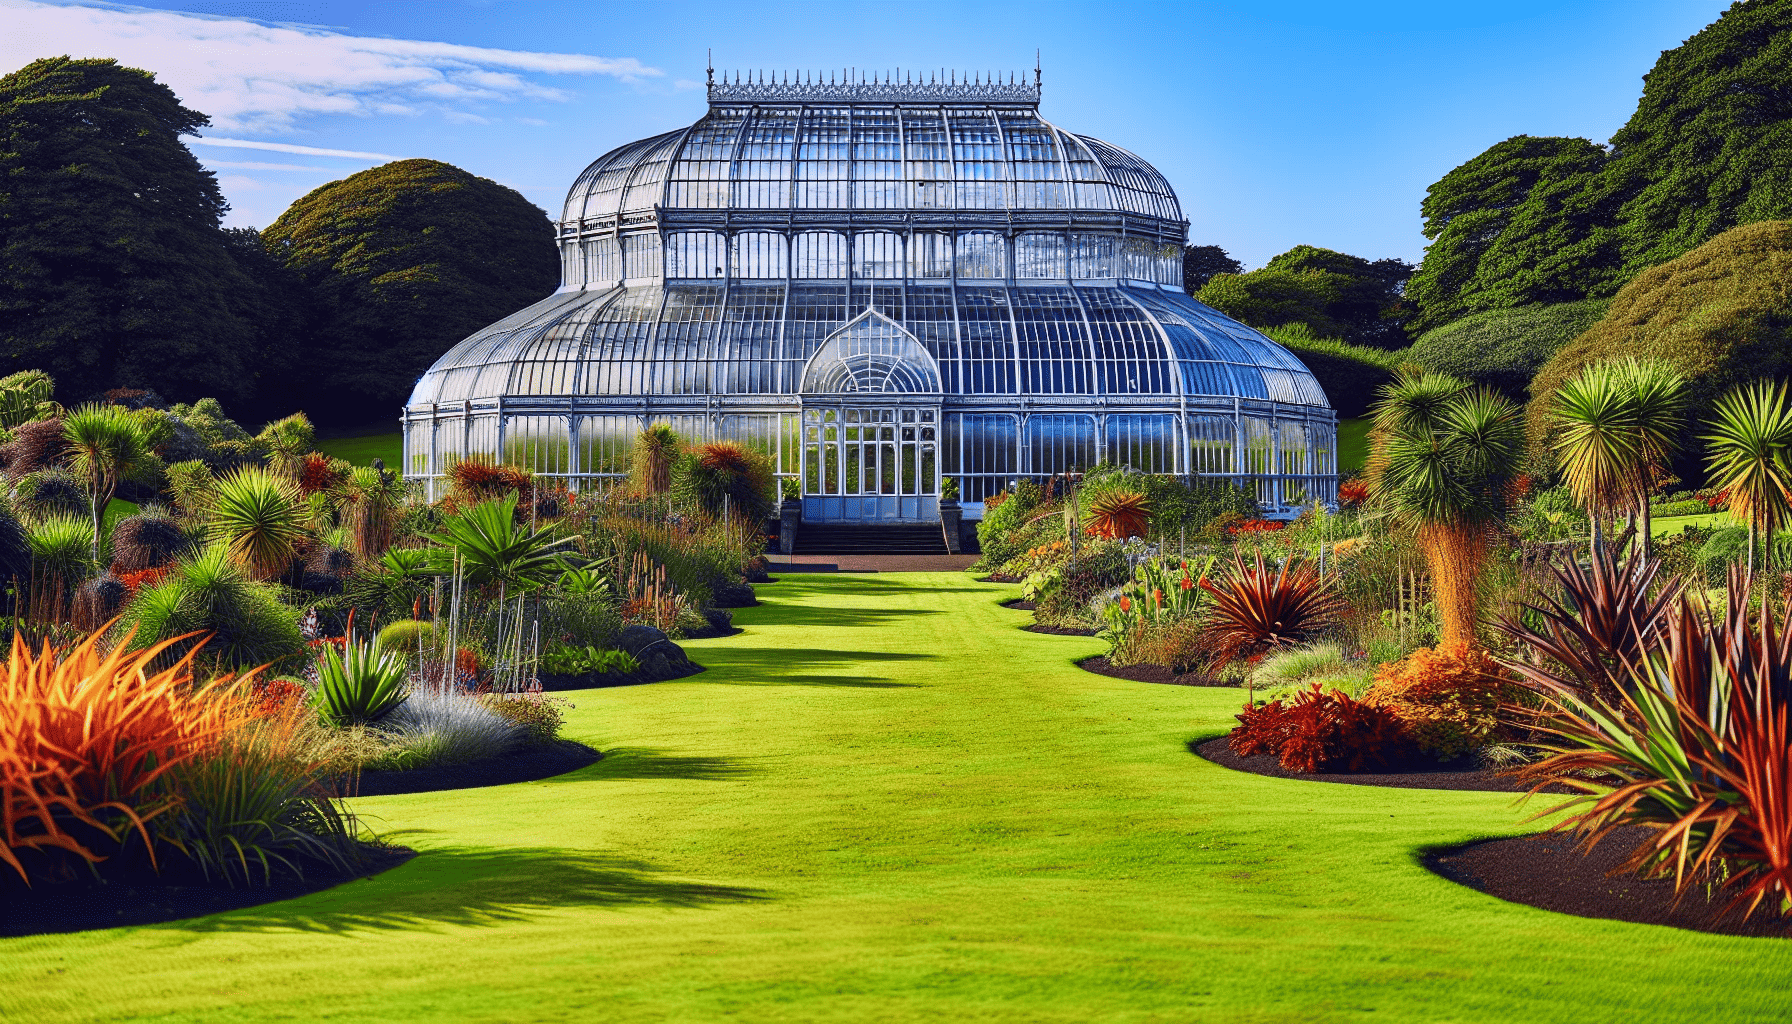 Botanic Gardens and Palm House in Belfast